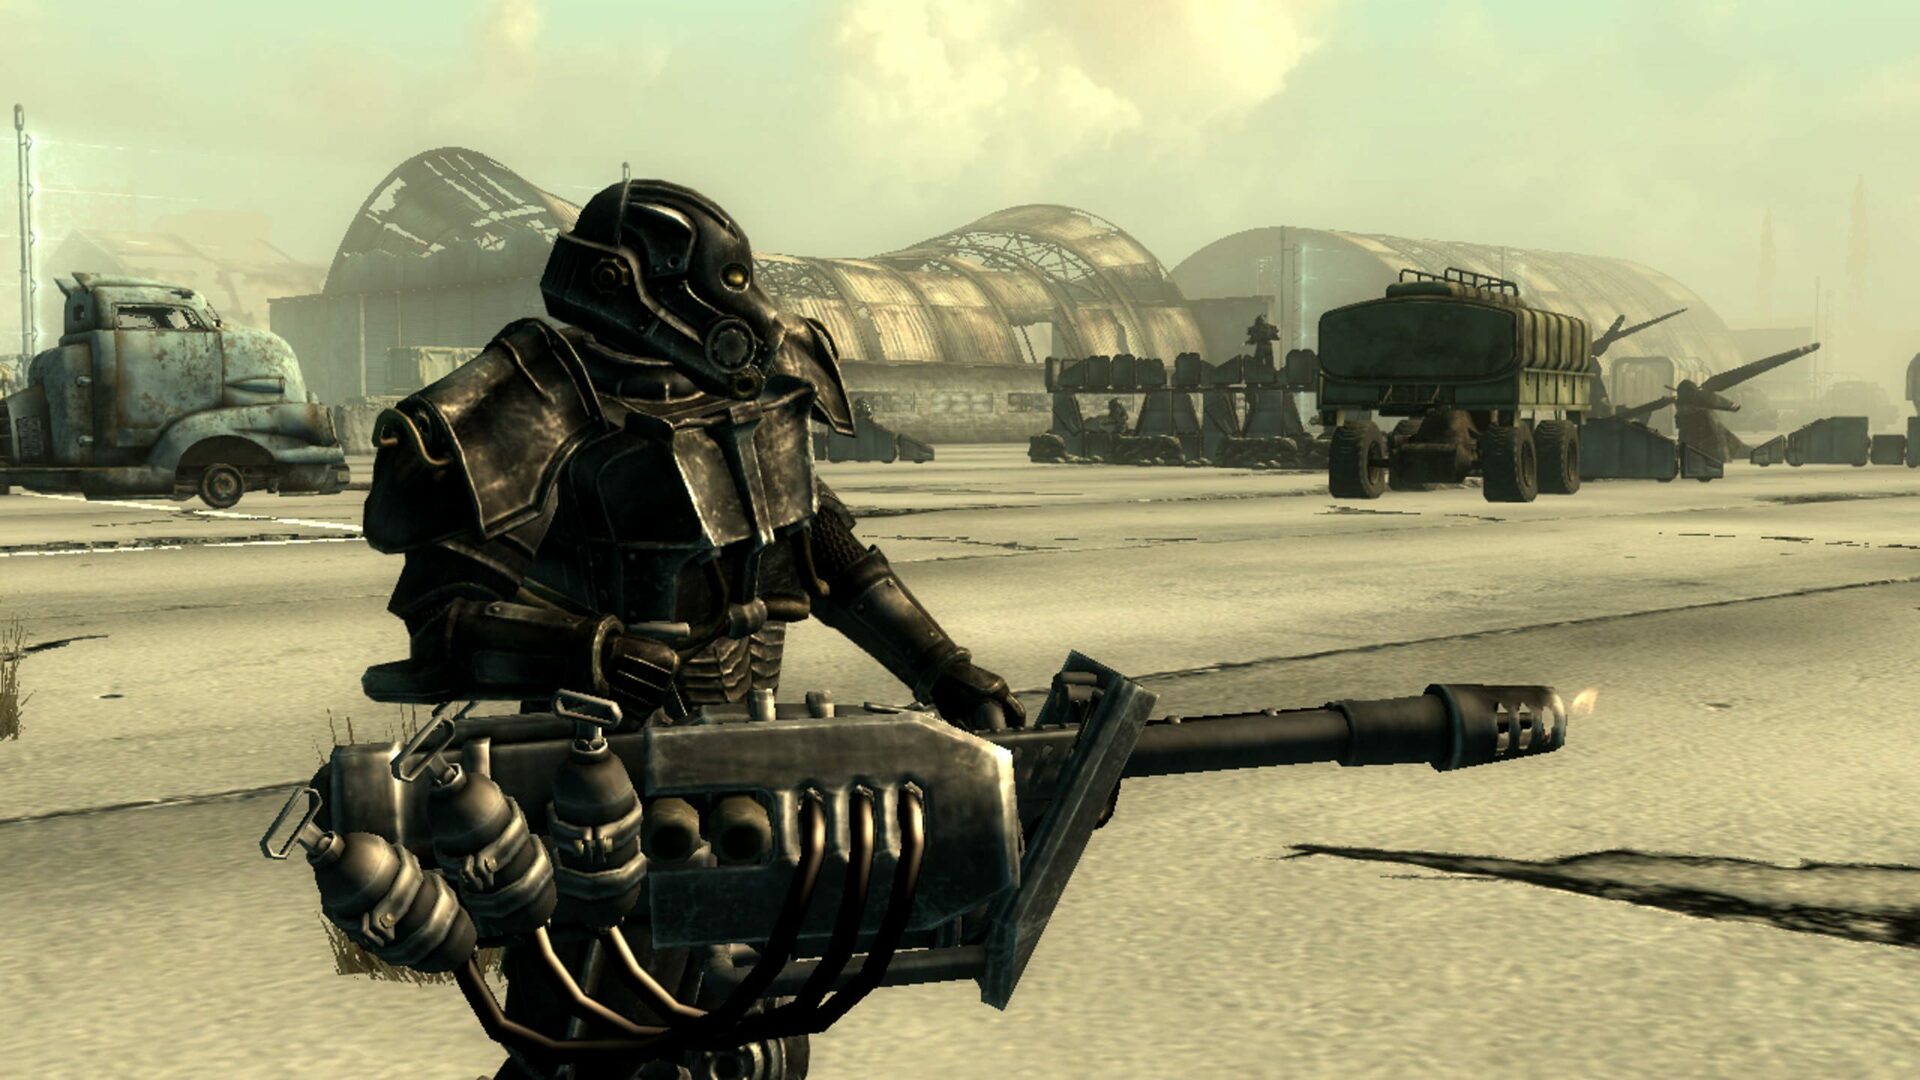 Fallout 3 - Game Of The Year Edition Steam Key for PC - Buy now